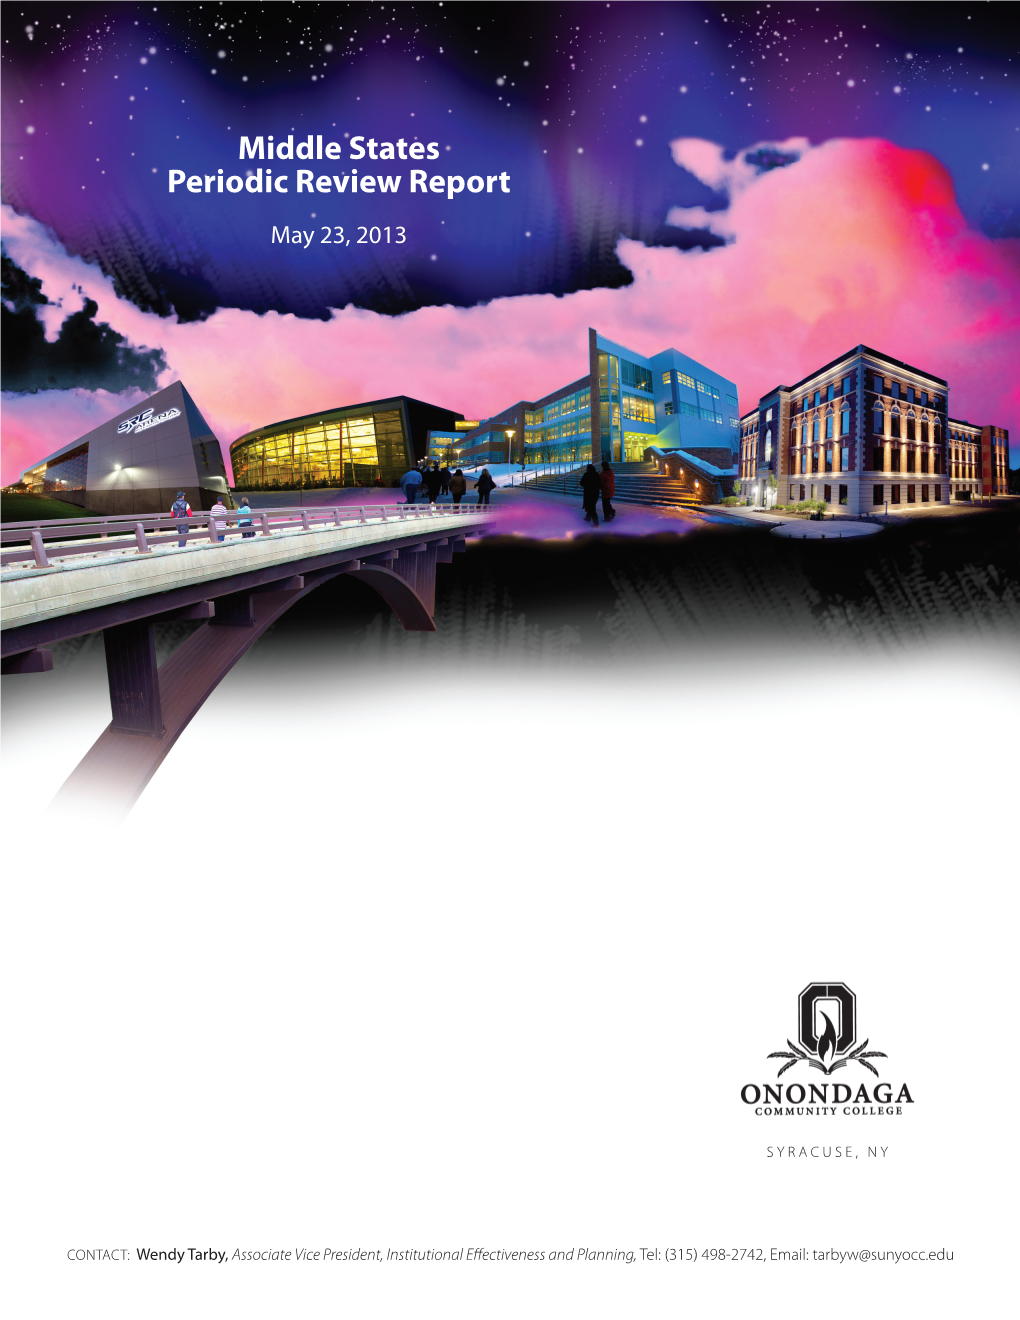 Middle States Periodic Review Report May 23, 2013